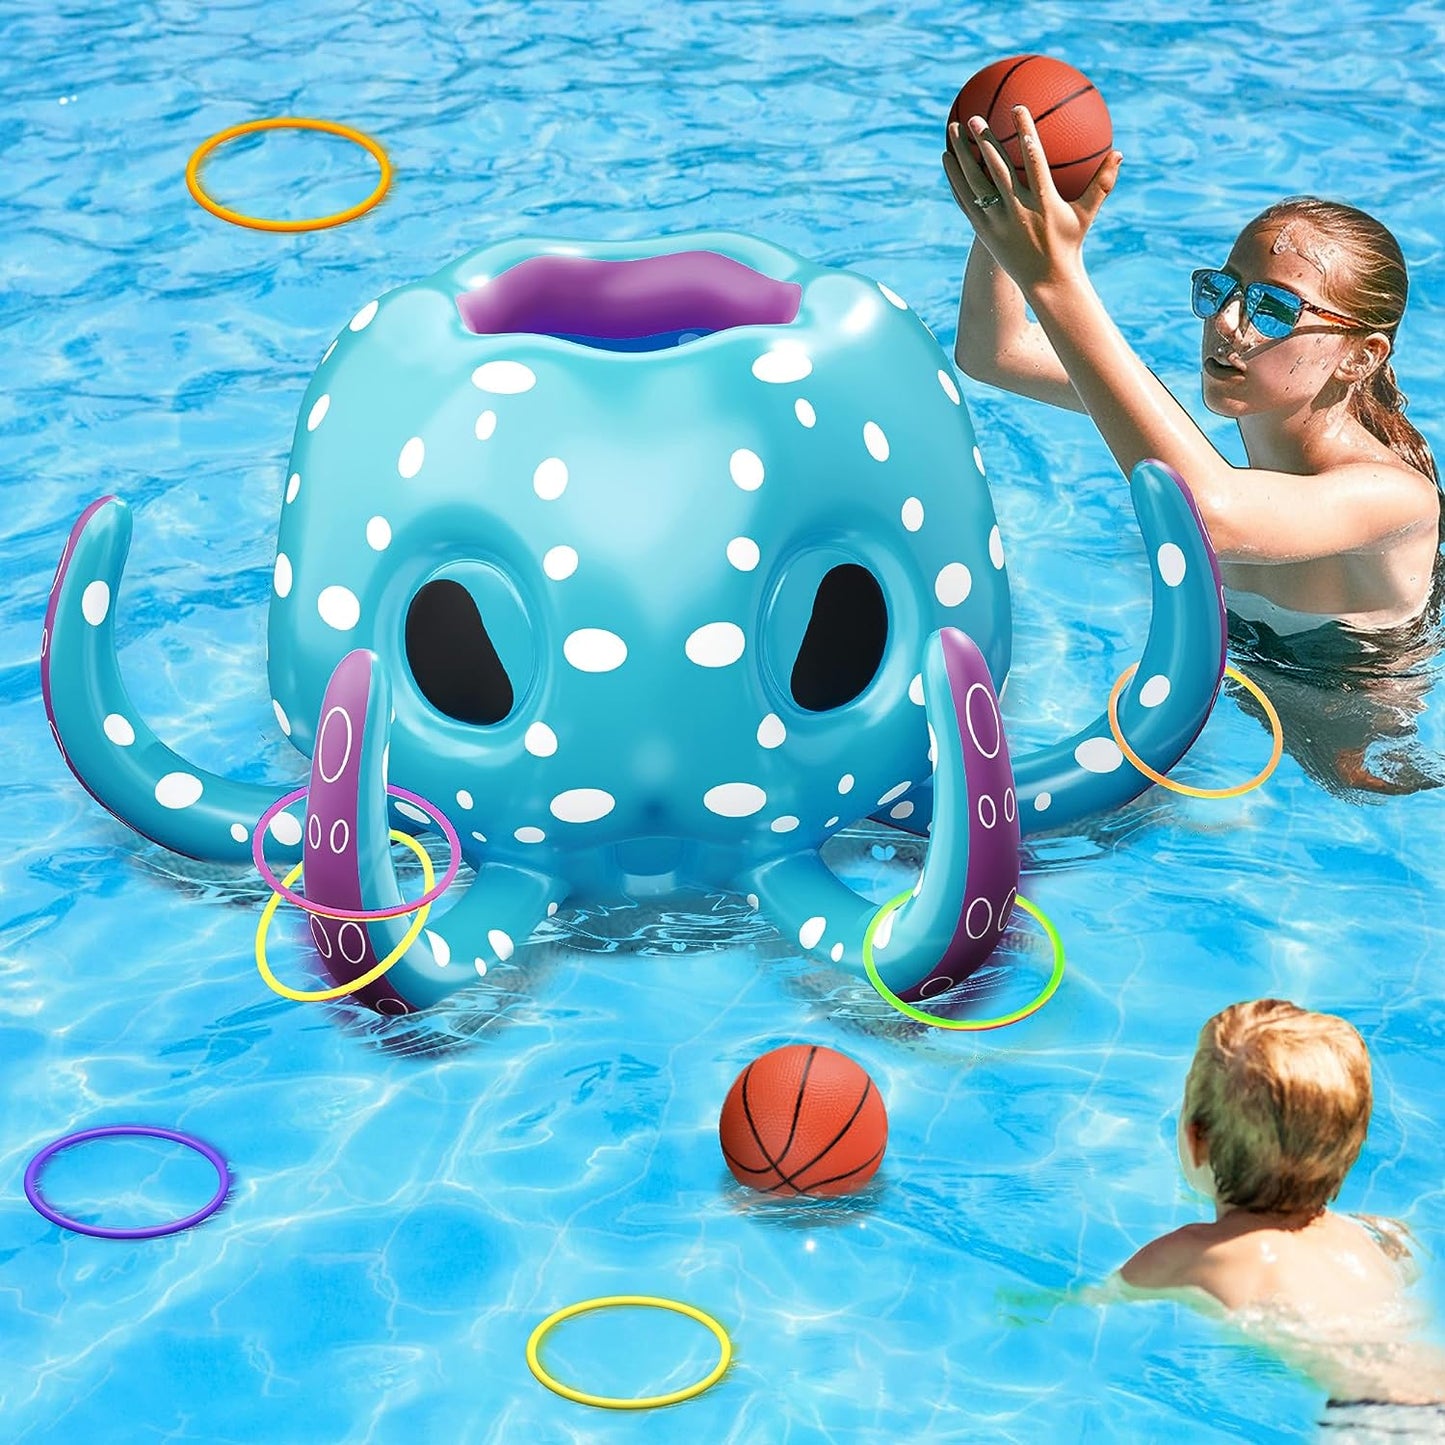 Kids Octopus Pool Toys, 2-in-1 Inflatable Basketball Hoop & Ring Toss Games, Toddler Outdoor Floating Water Fun Play, Cool Summer Swim Family Party Gift 3 4 5 6 7 8 Yr Old Boy Girl Teens